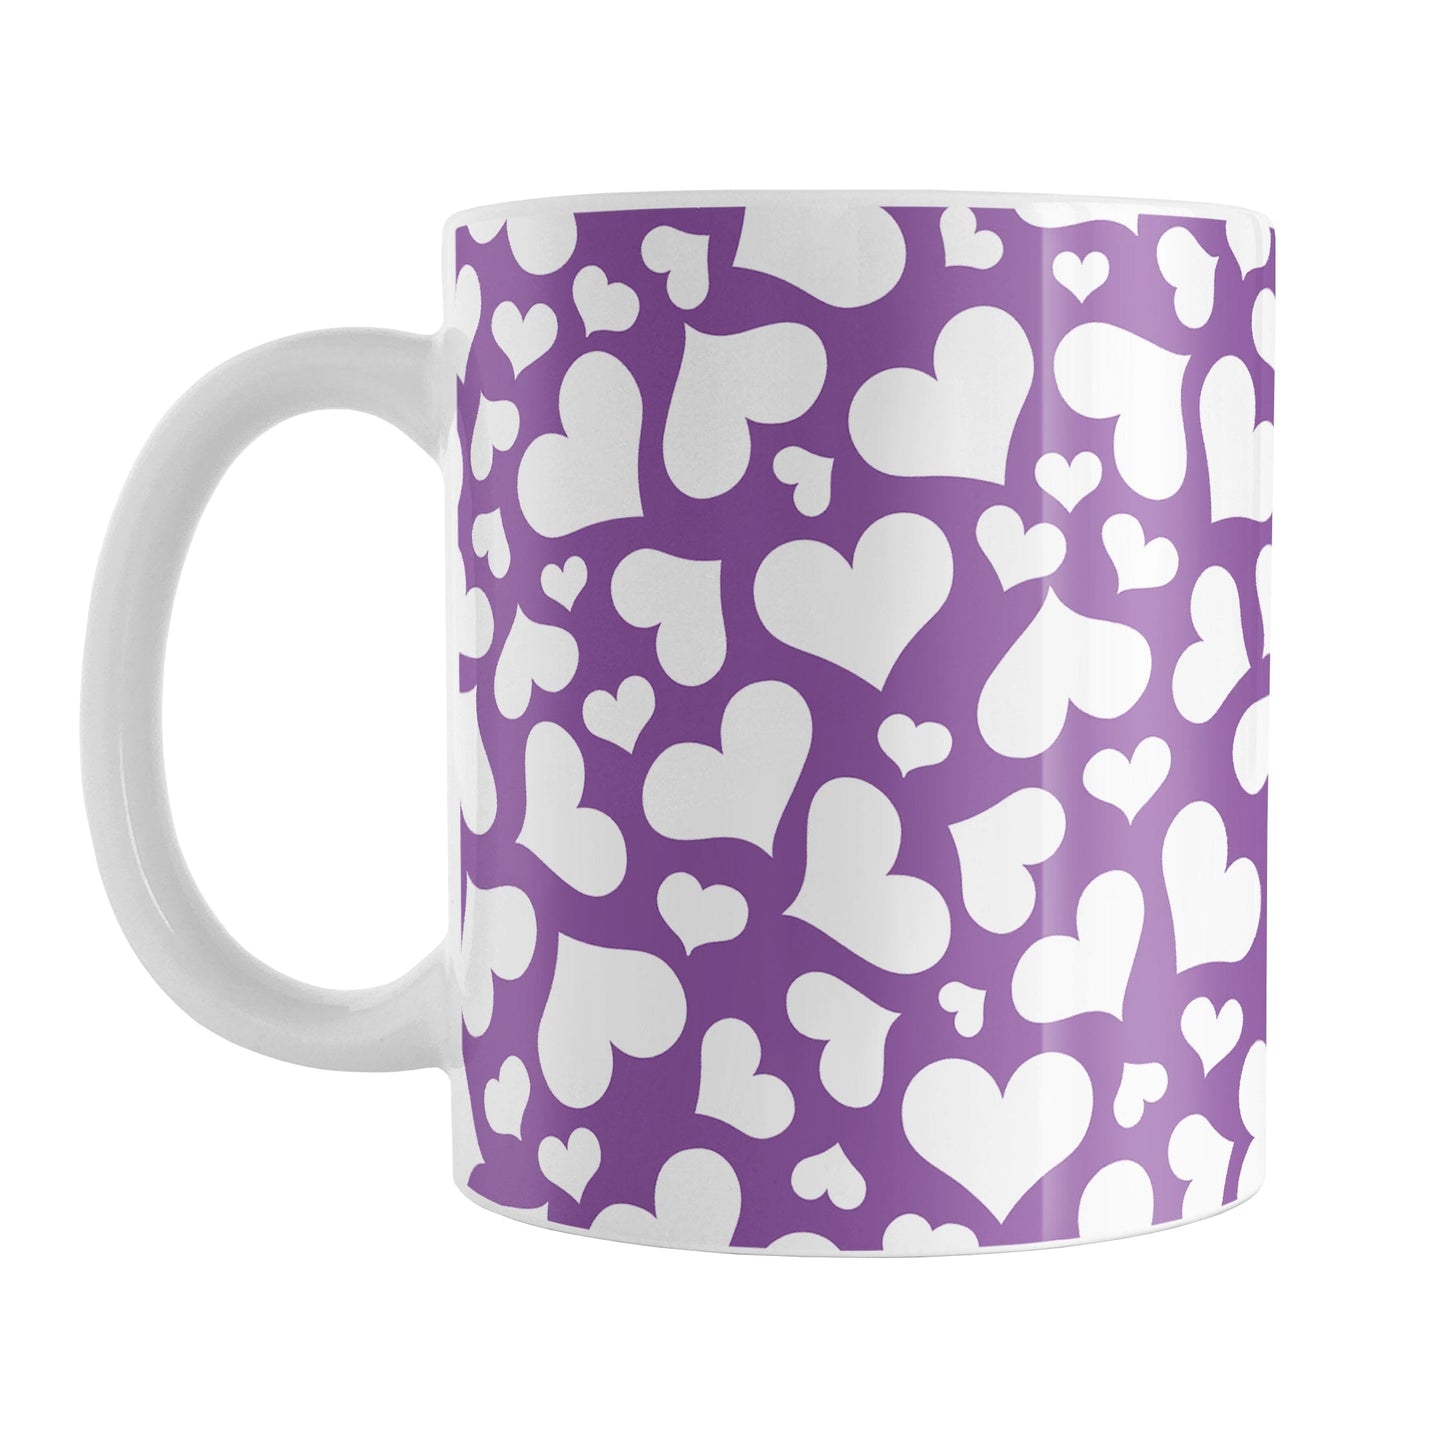 Cute White Hearts on Purple Mug (11oz) at Amy's Coffee Mugs. A ceramic coffee mug designed with a multi-directional pattern of cute white hearts over a purple background color that wraps around the mug to the handle.